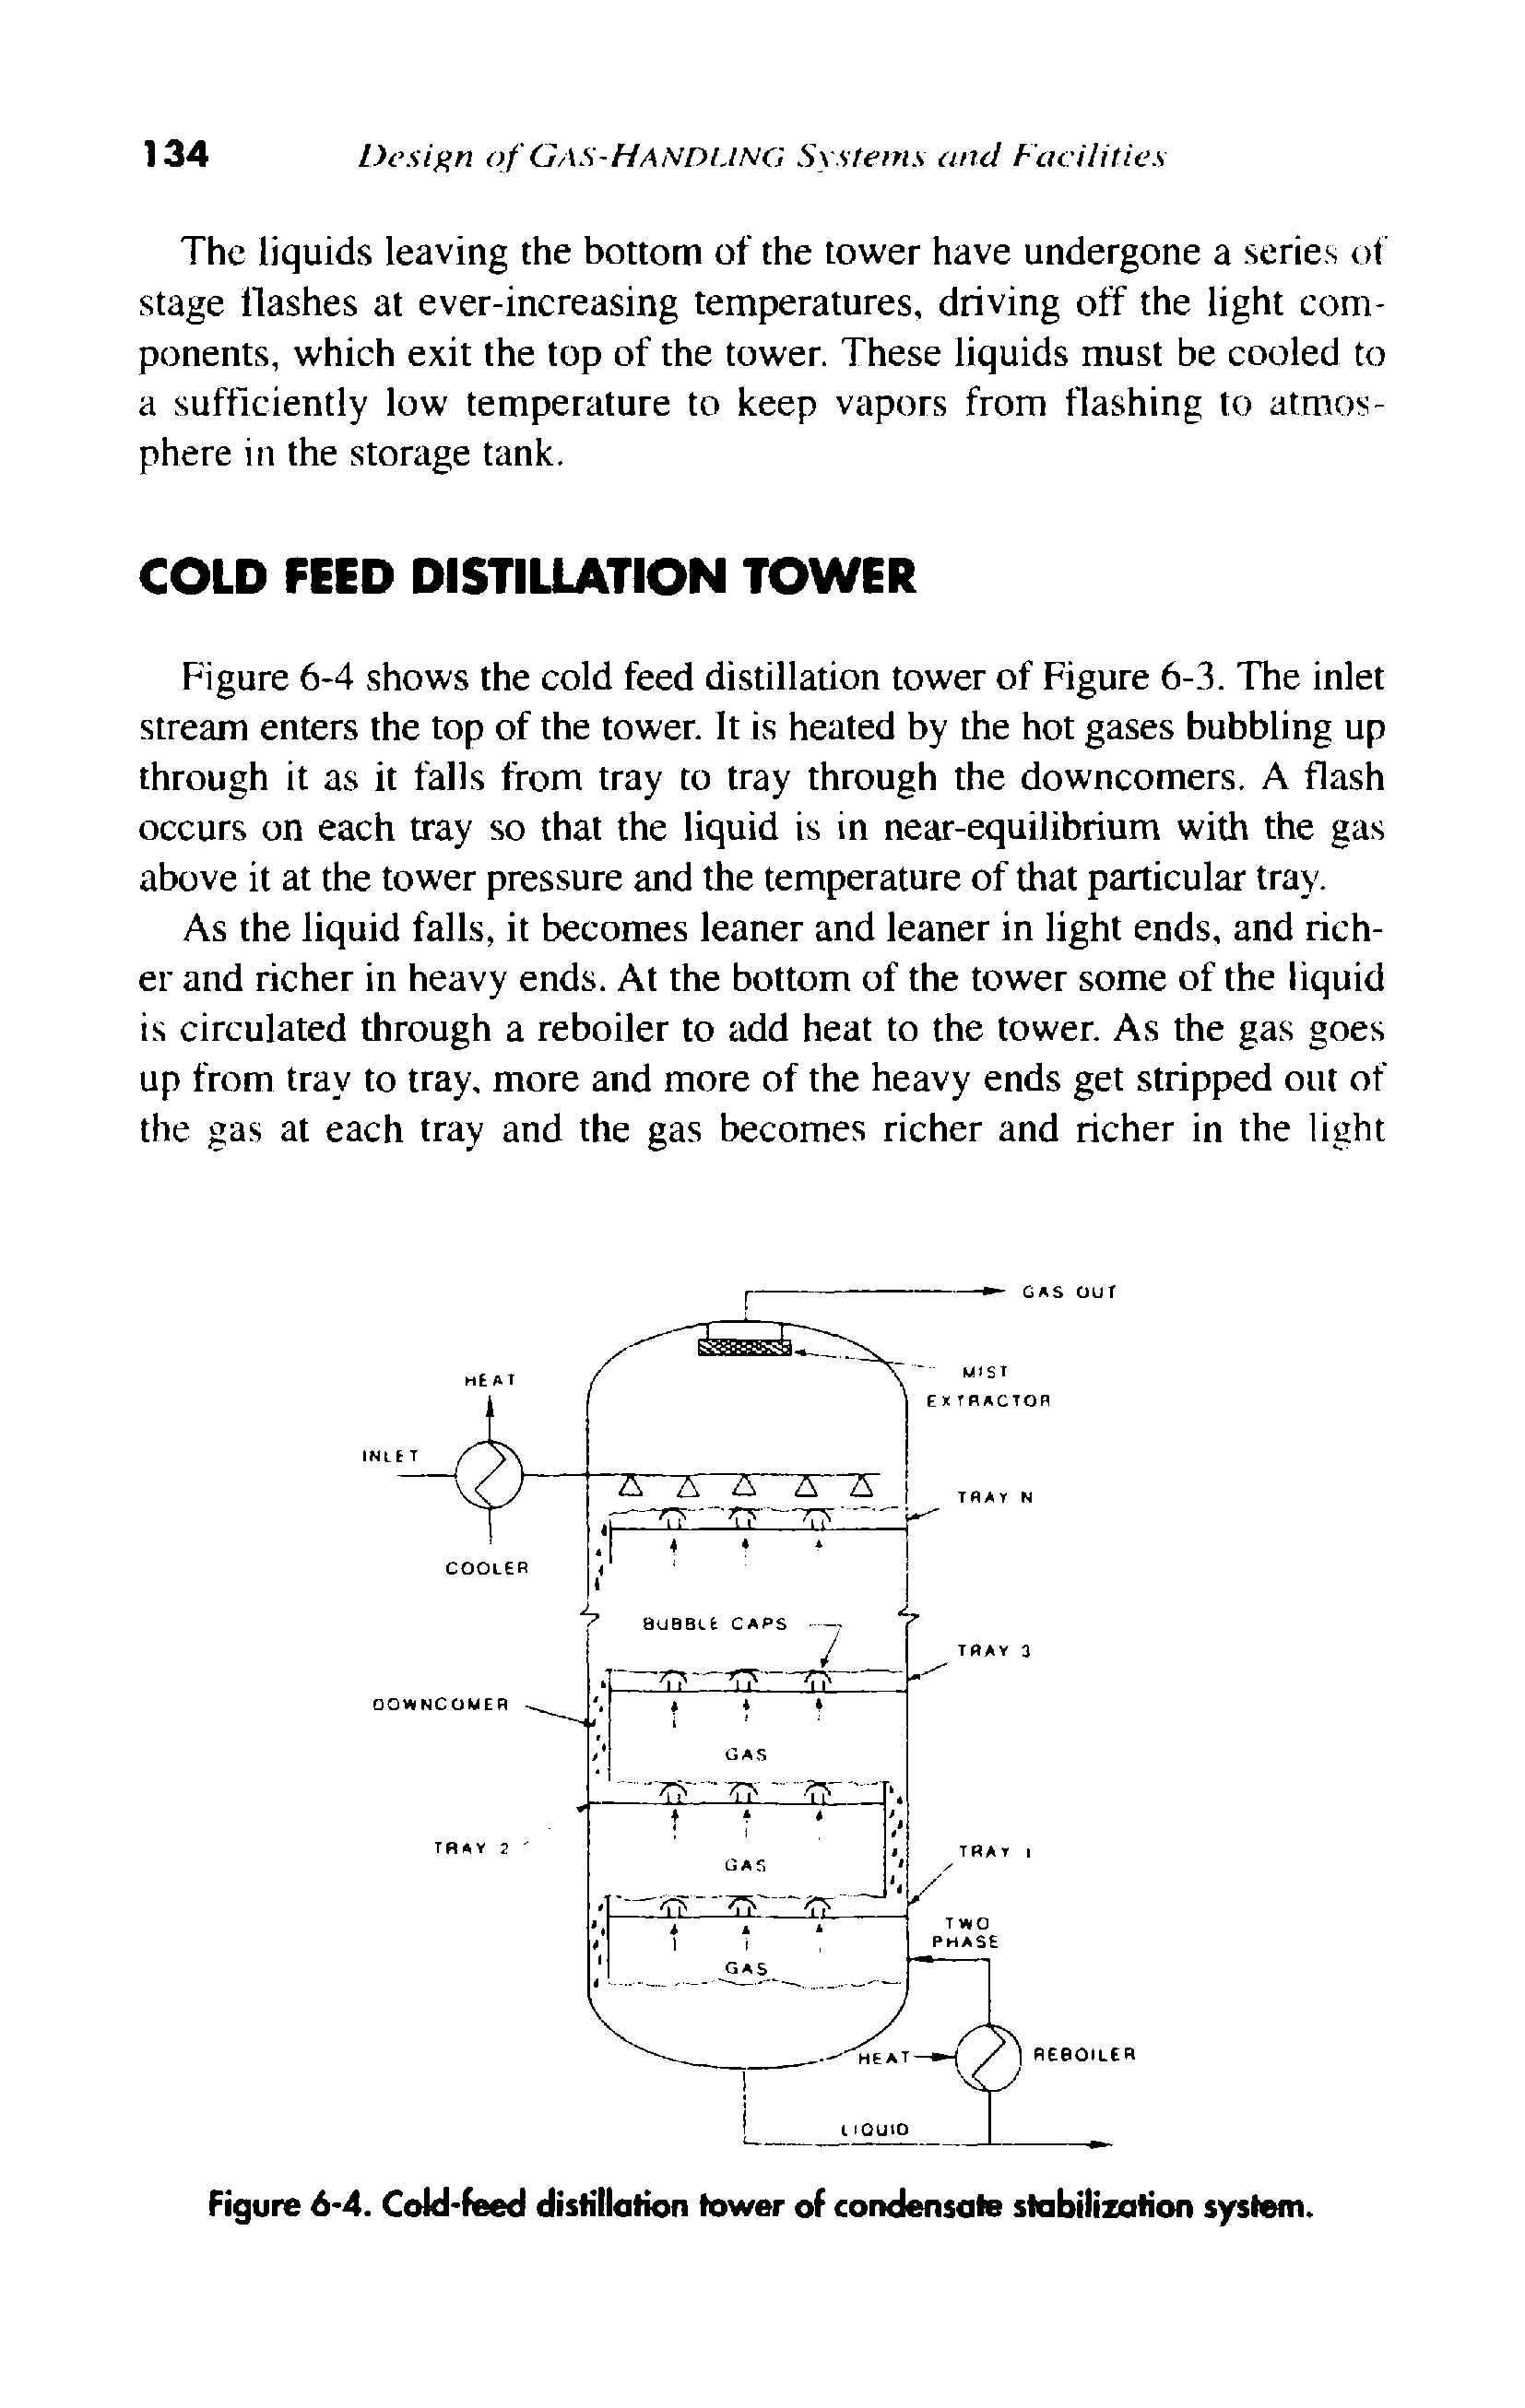 Figure 6-4 shows the cold feed distillation tower of Figure 6-3. The inlet stream enters the top of the tower. It is heated by the hot gases bubbling up through it as it falls from tray to tray through the downcomers, A flash occurs on each tray so that the liquid is in near-equilibrium with the gas above it at the tower pressure and the temperature of that particular tray.